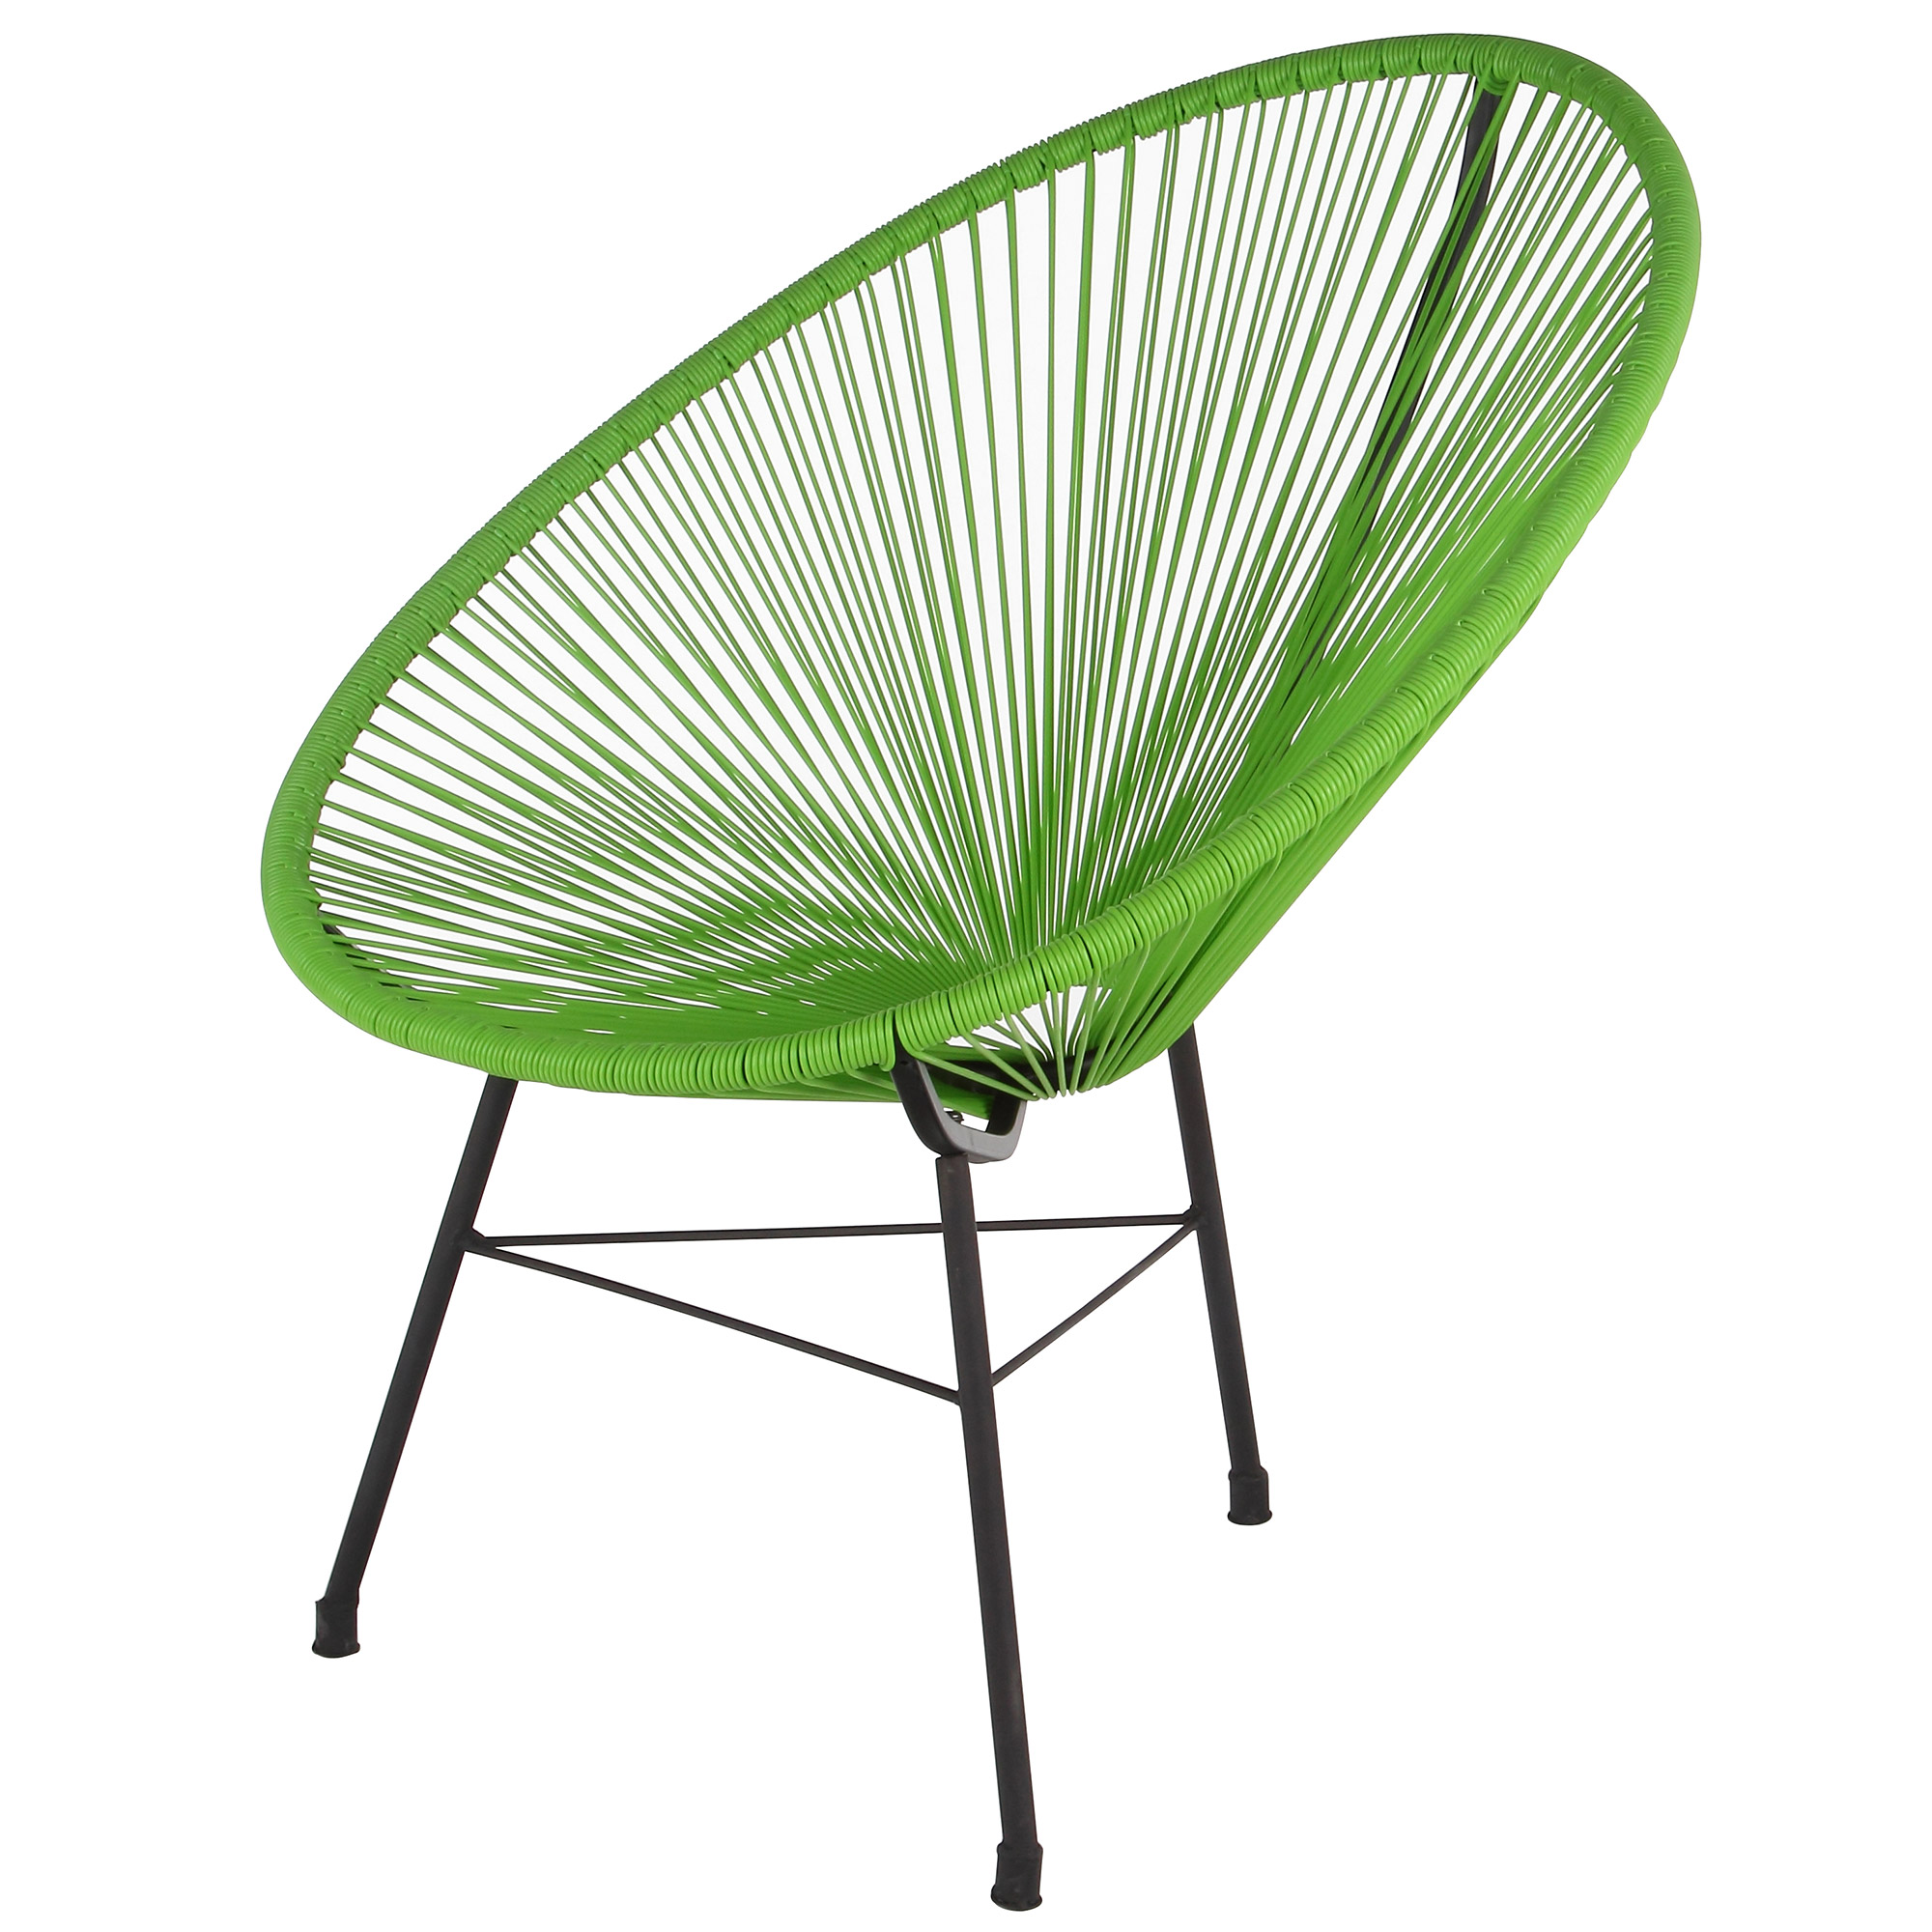 Acapulco Lounge Chair, Green, Set of 2 - image 2 of 3